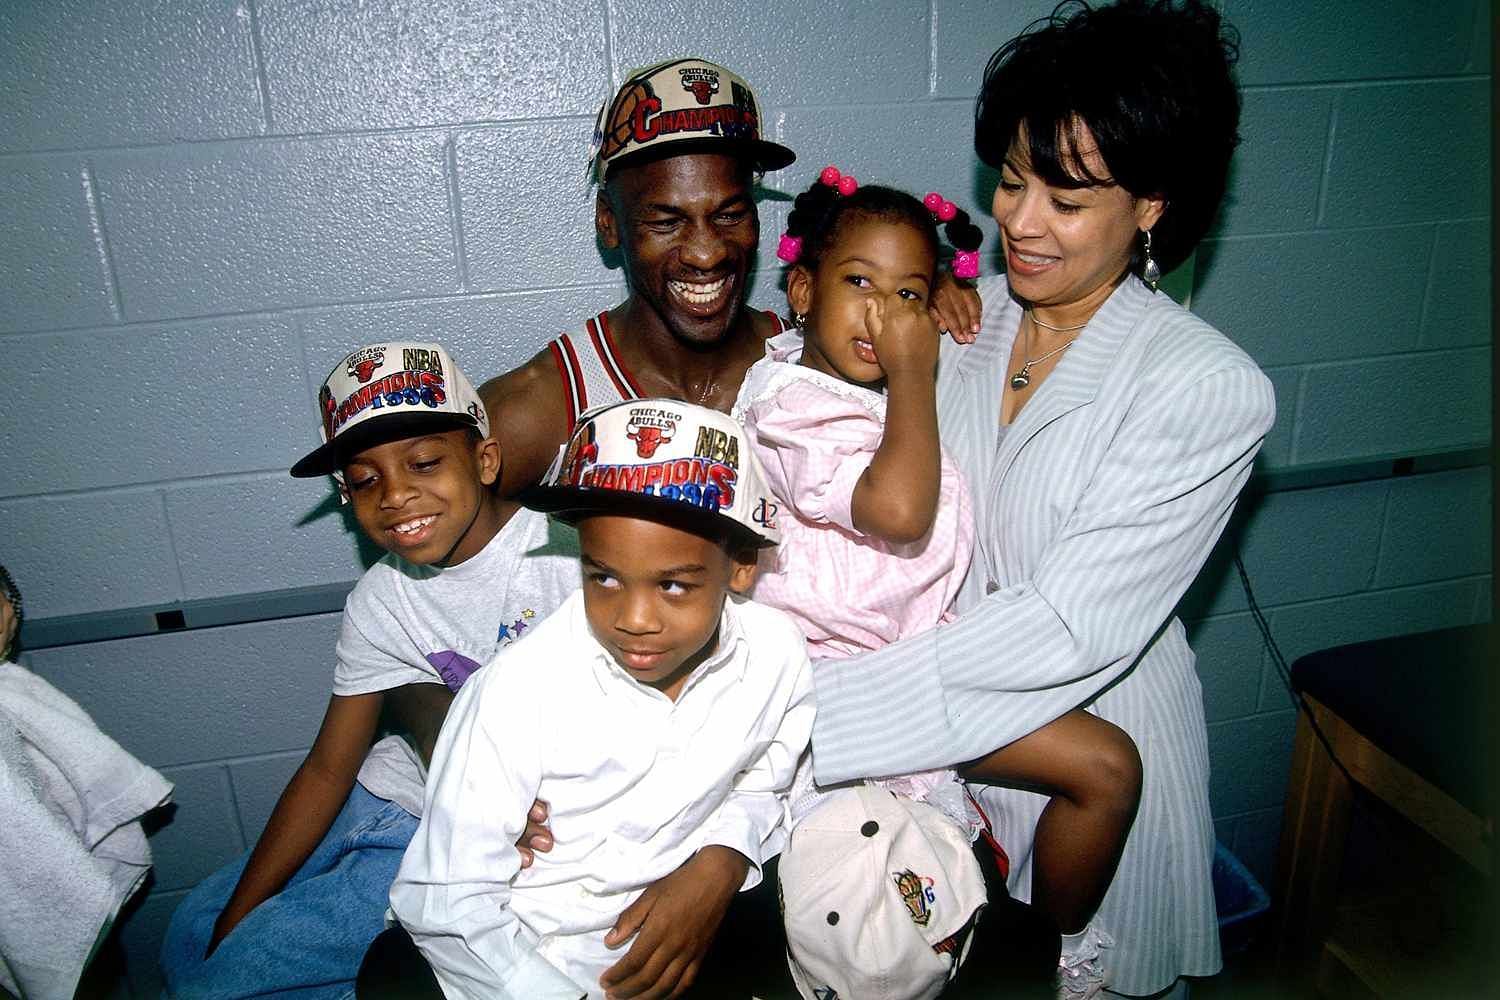 Michael Jordan with his family back in 1996 (Photo: People Magazine)